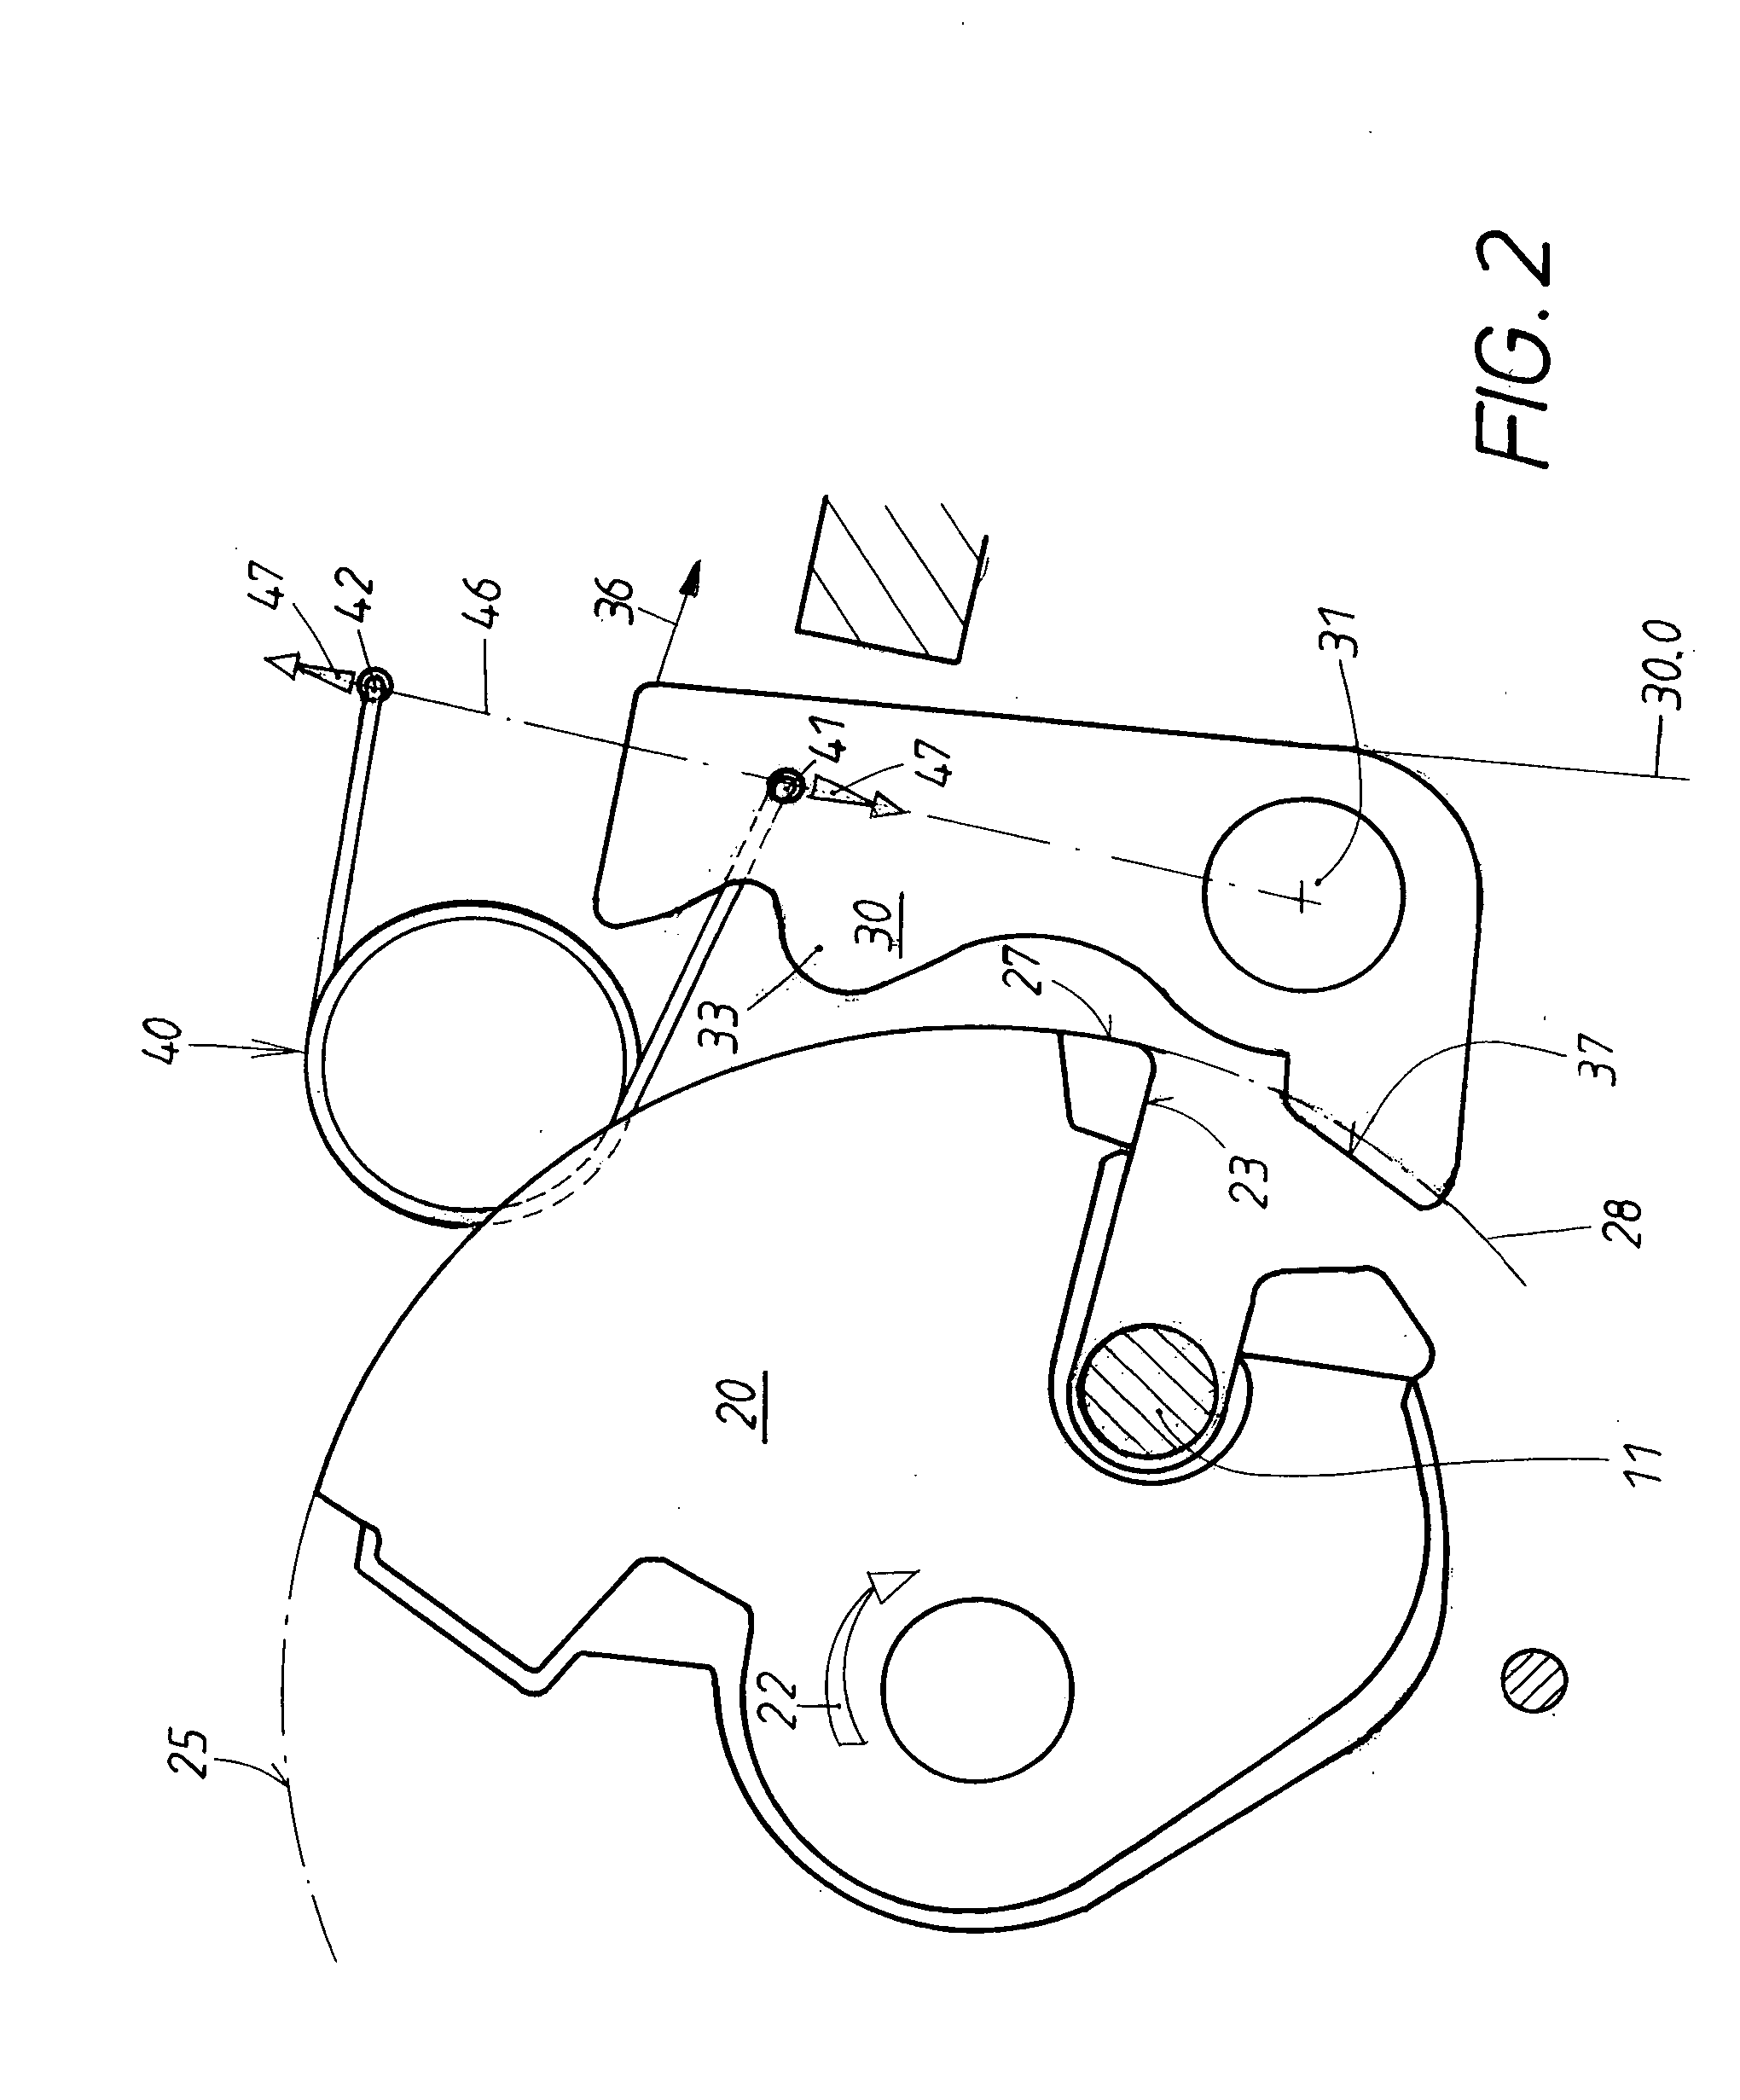 Device for actuating locks on doors or hatches of vehicles